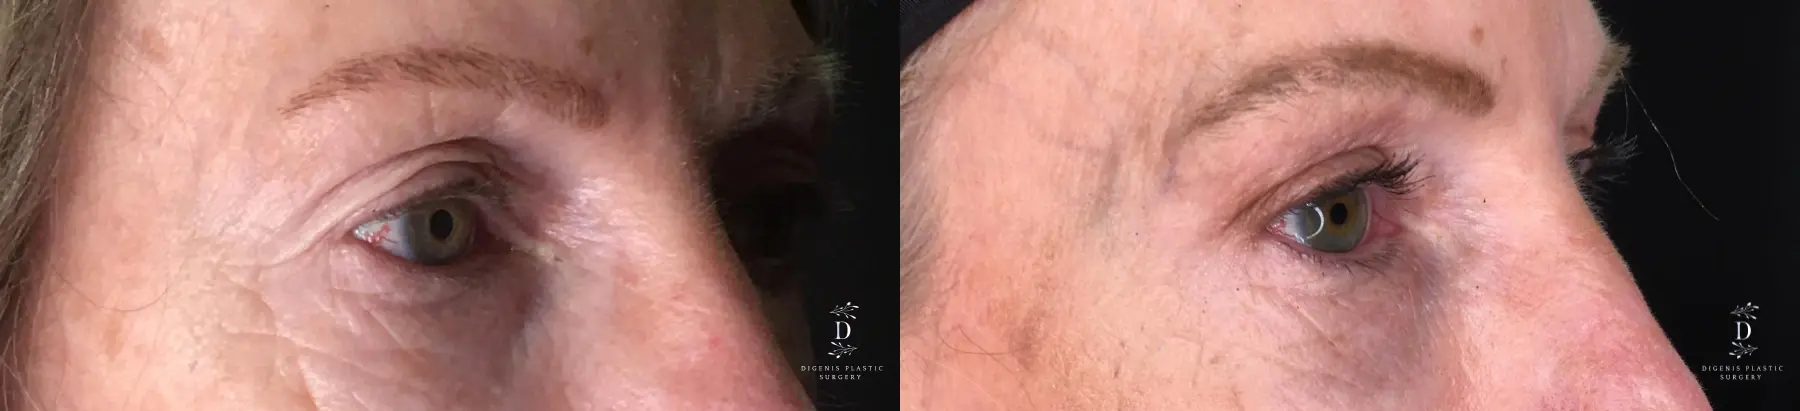 Eyelid Surgery: Patient 23 - Before and After 2